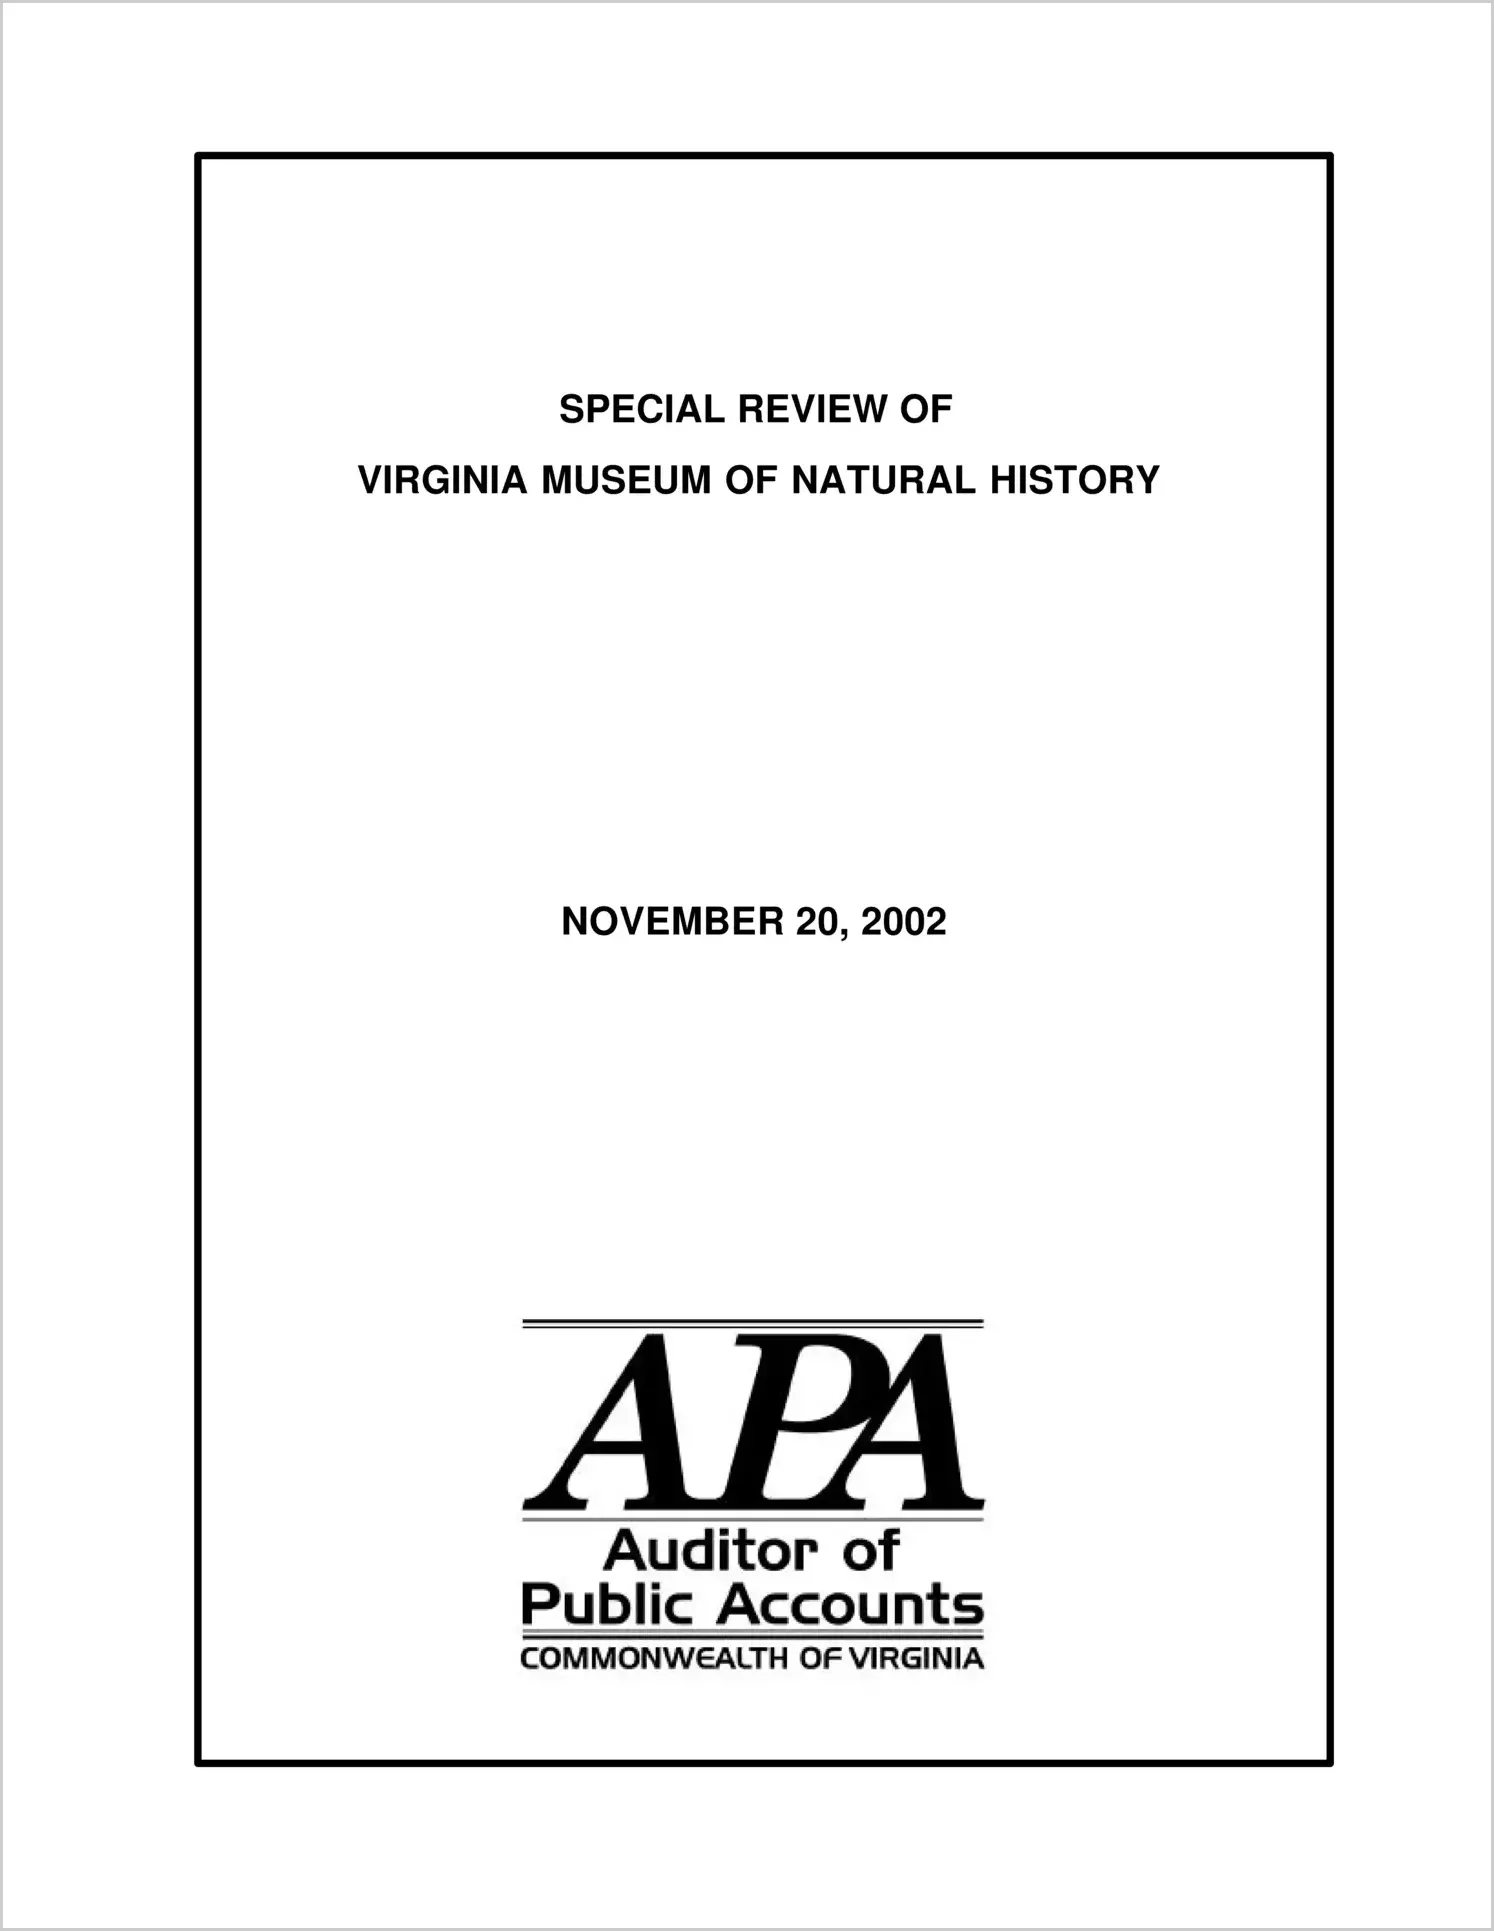 Special ReportSpecial Review of Virginia Museum of Natural History(Dated: November 20, 2002)